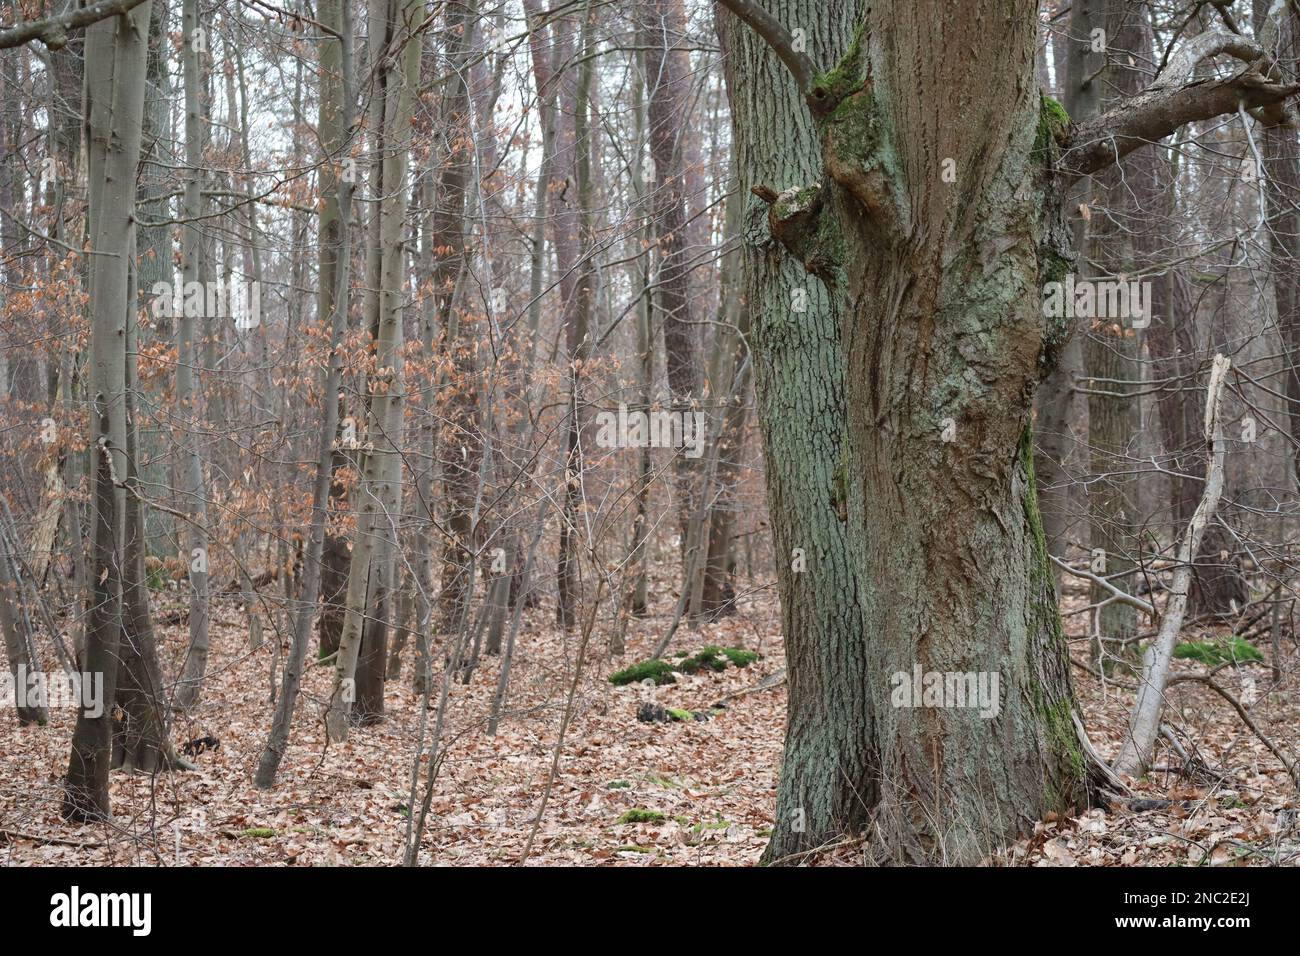 two older Trees in an actually young Forest Stock Photo